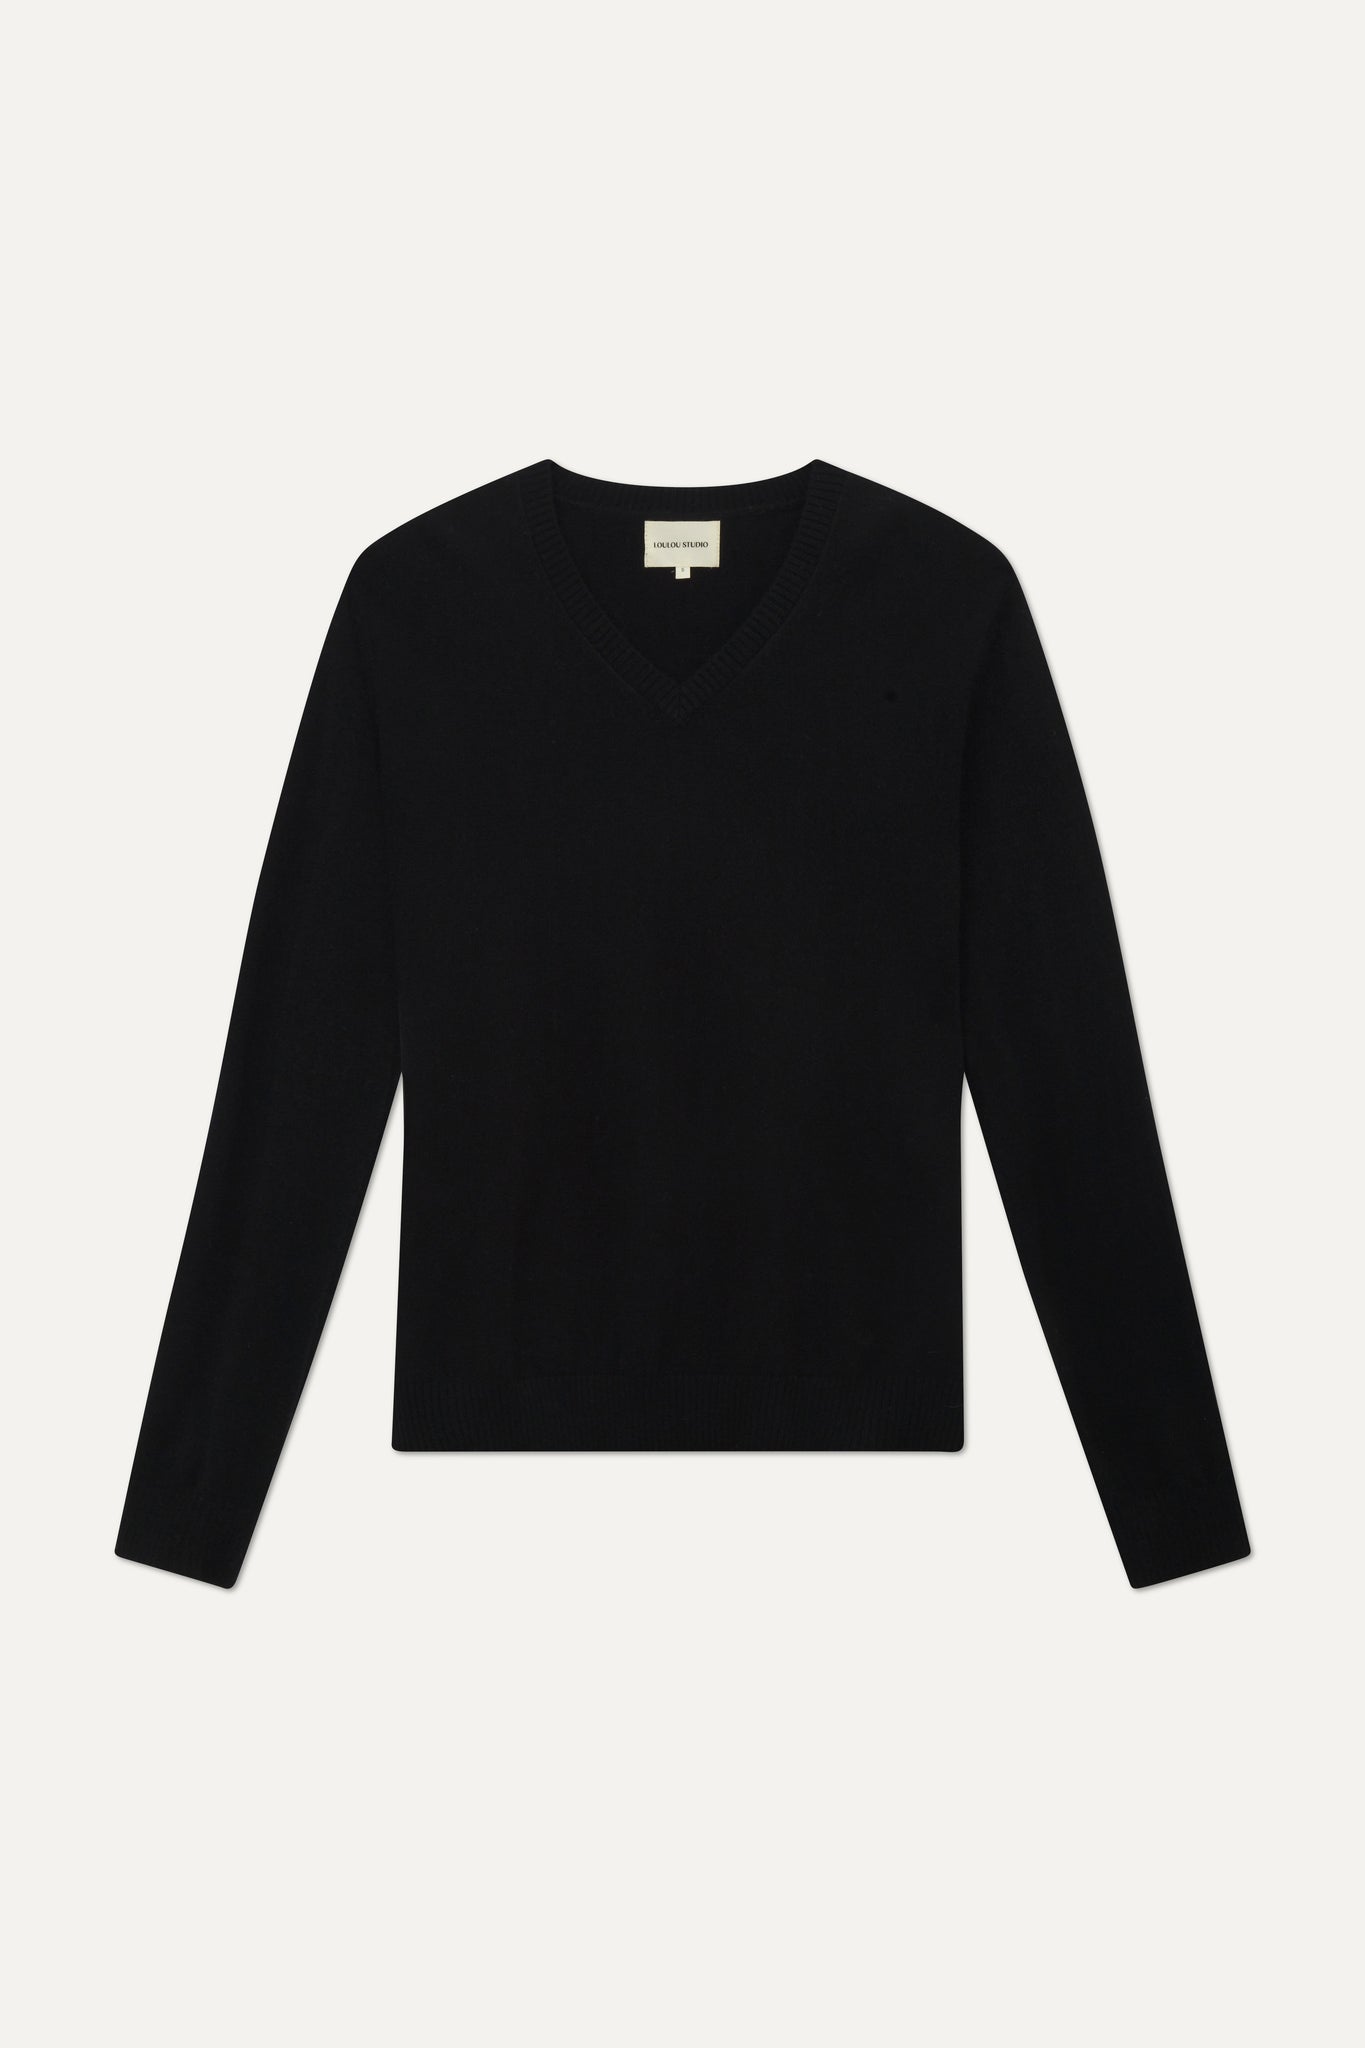 PURE CASHMERE V NECK SWEATER NEW SERAFINI  BY LOULOU STUDIO IN BLACK - BEYOND STUDIOS